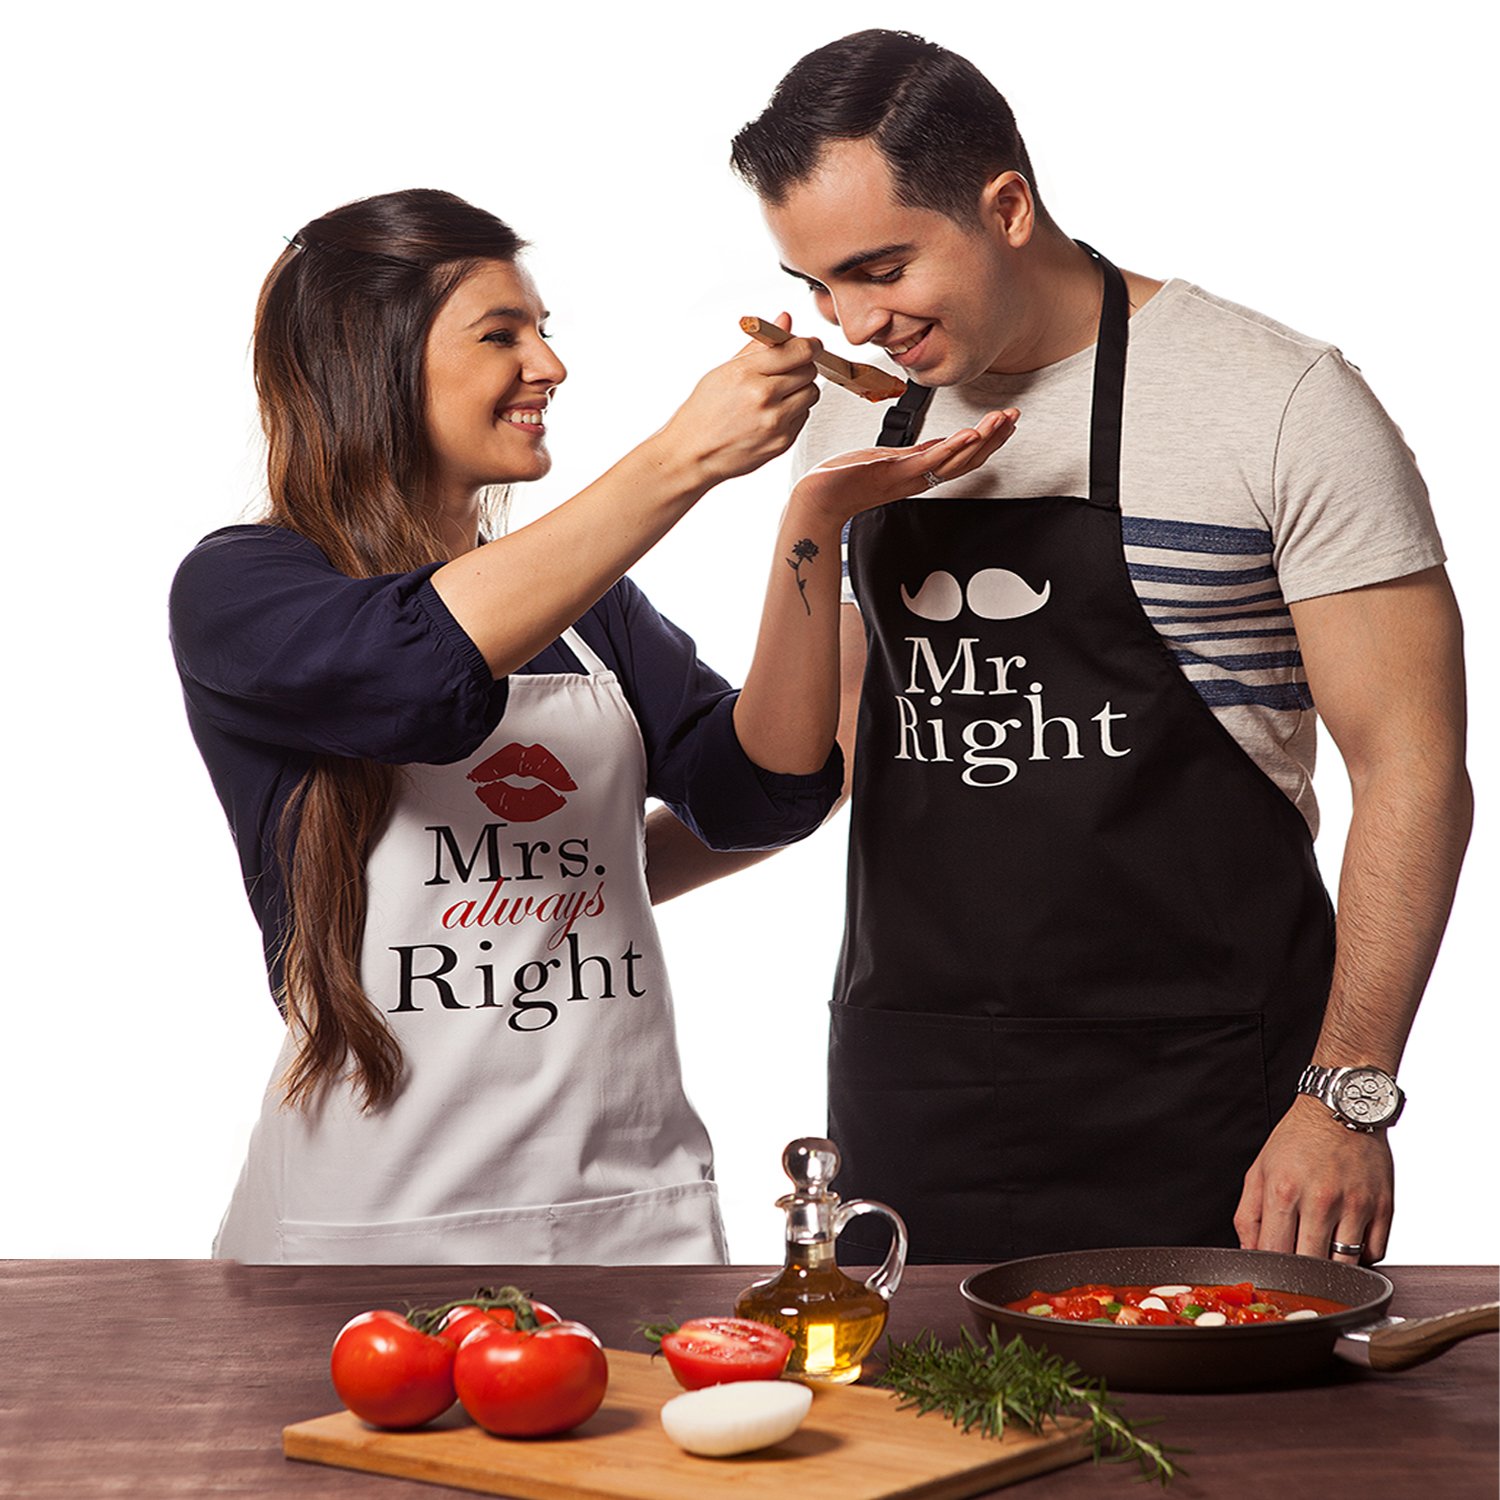 Nomsum Mr. & Mrs. Right 2-piece 1-size Matching Kitchen Apron for His and Hers, Unique Gift Ideas for Couples, Kitchen Aprons Gift Set for Weddings, Anniversaries, Engagements, and Housewarmings